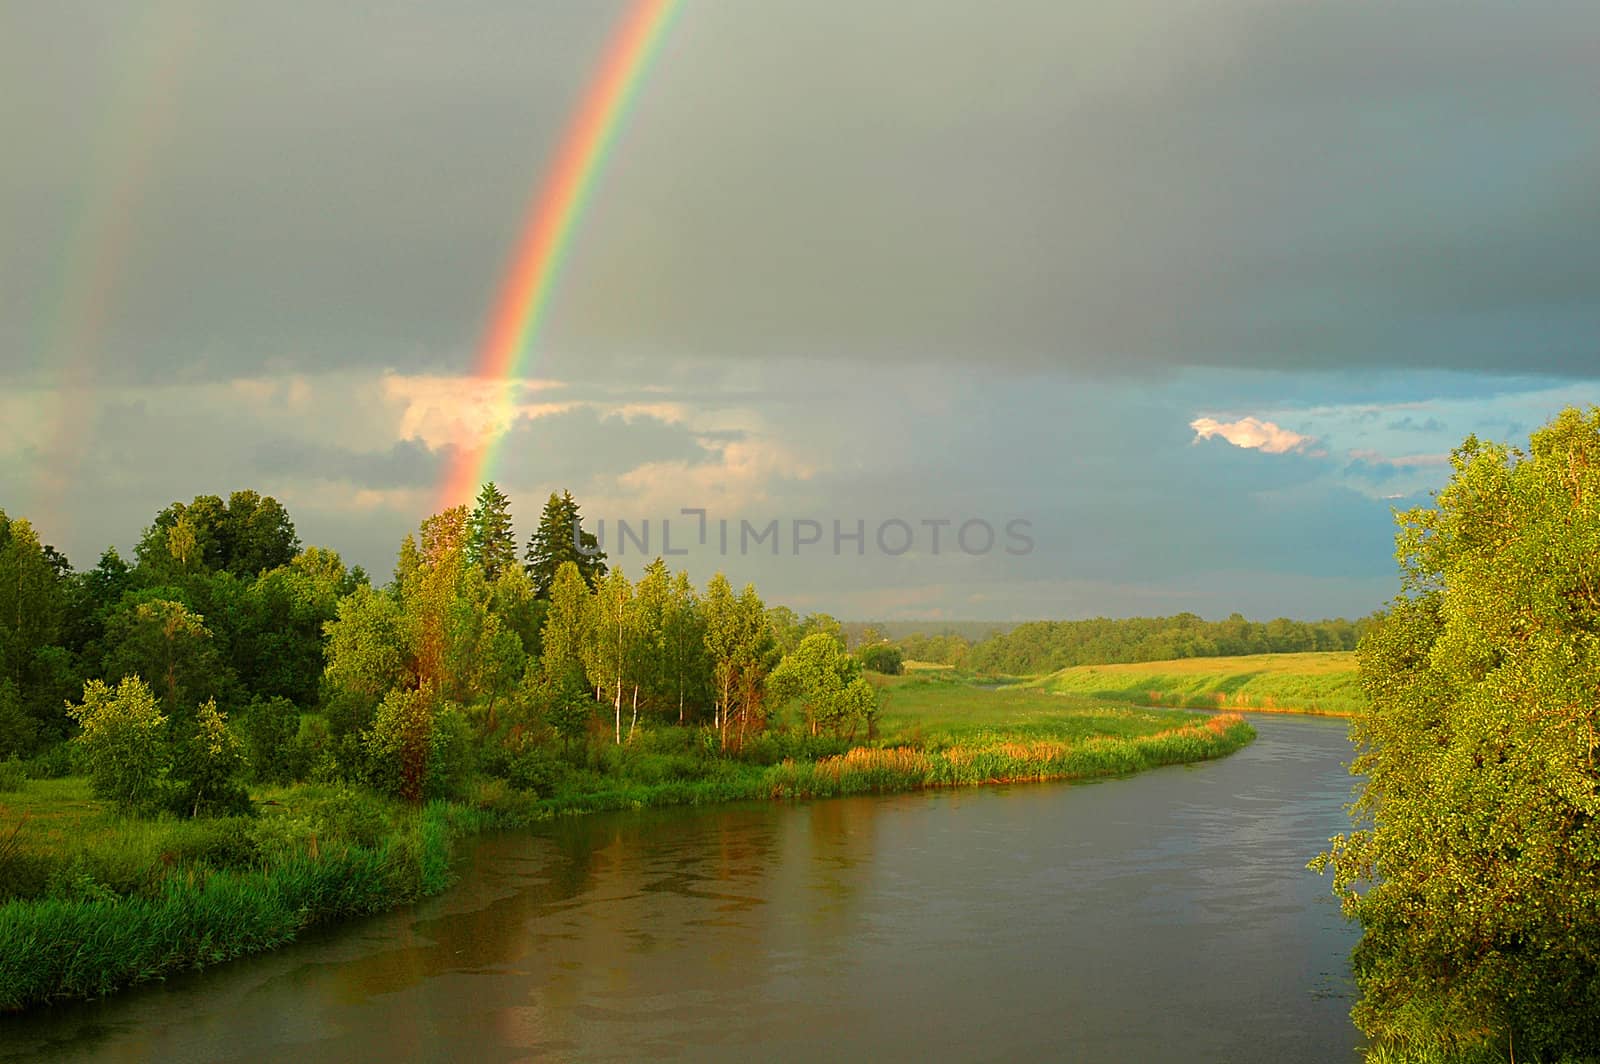 Rainbow above the river Dubna (Russia) in the summer evening.